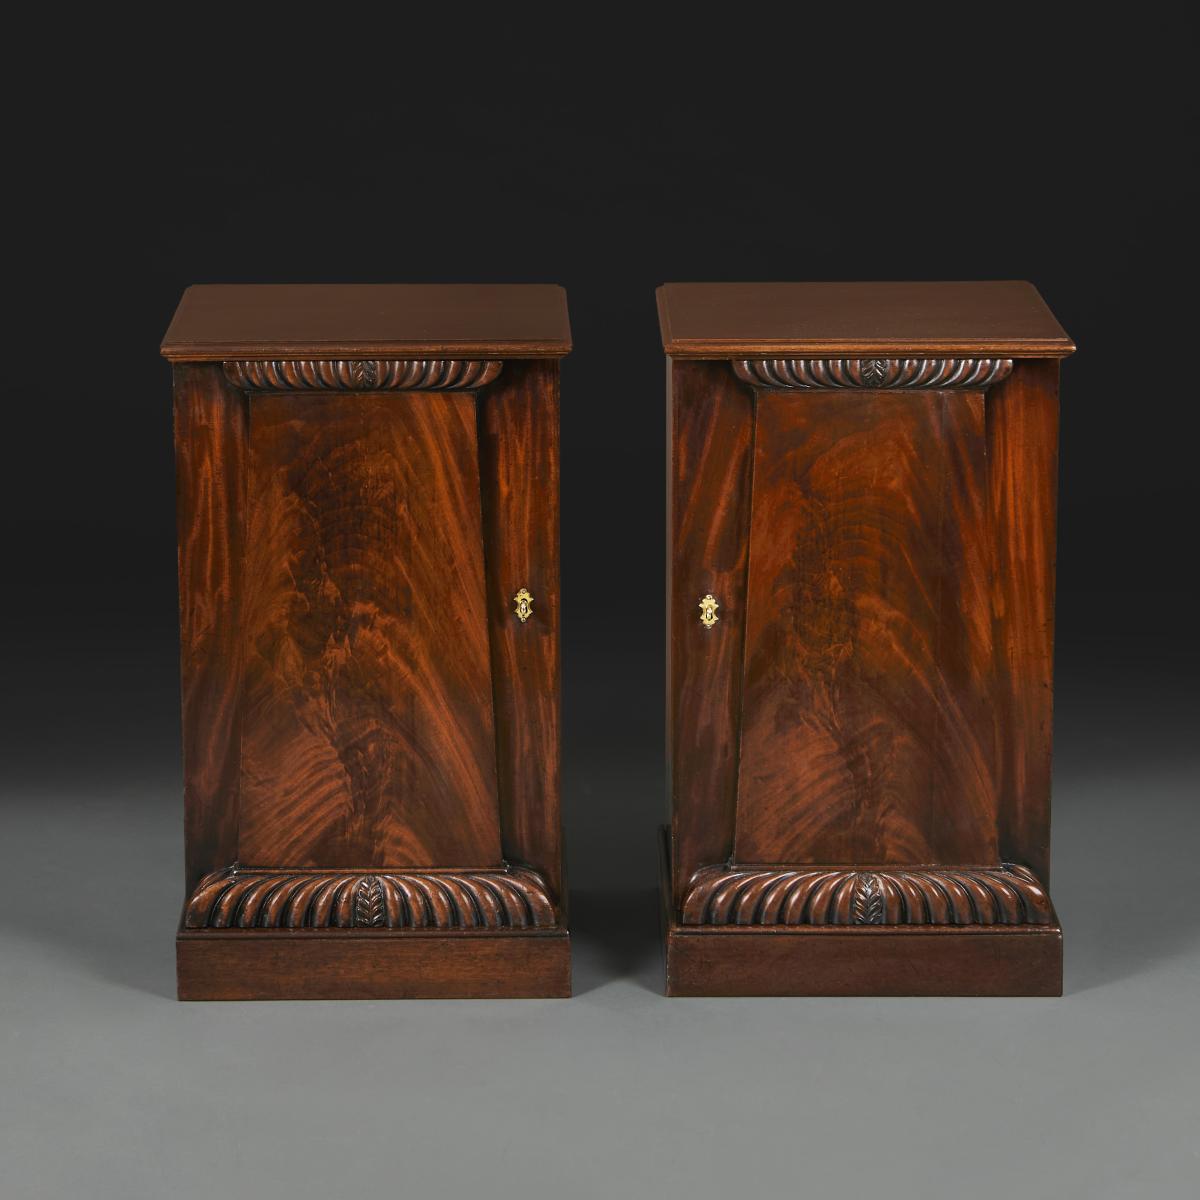 Pair of 19th Century Pedestal Bedside Cabinets